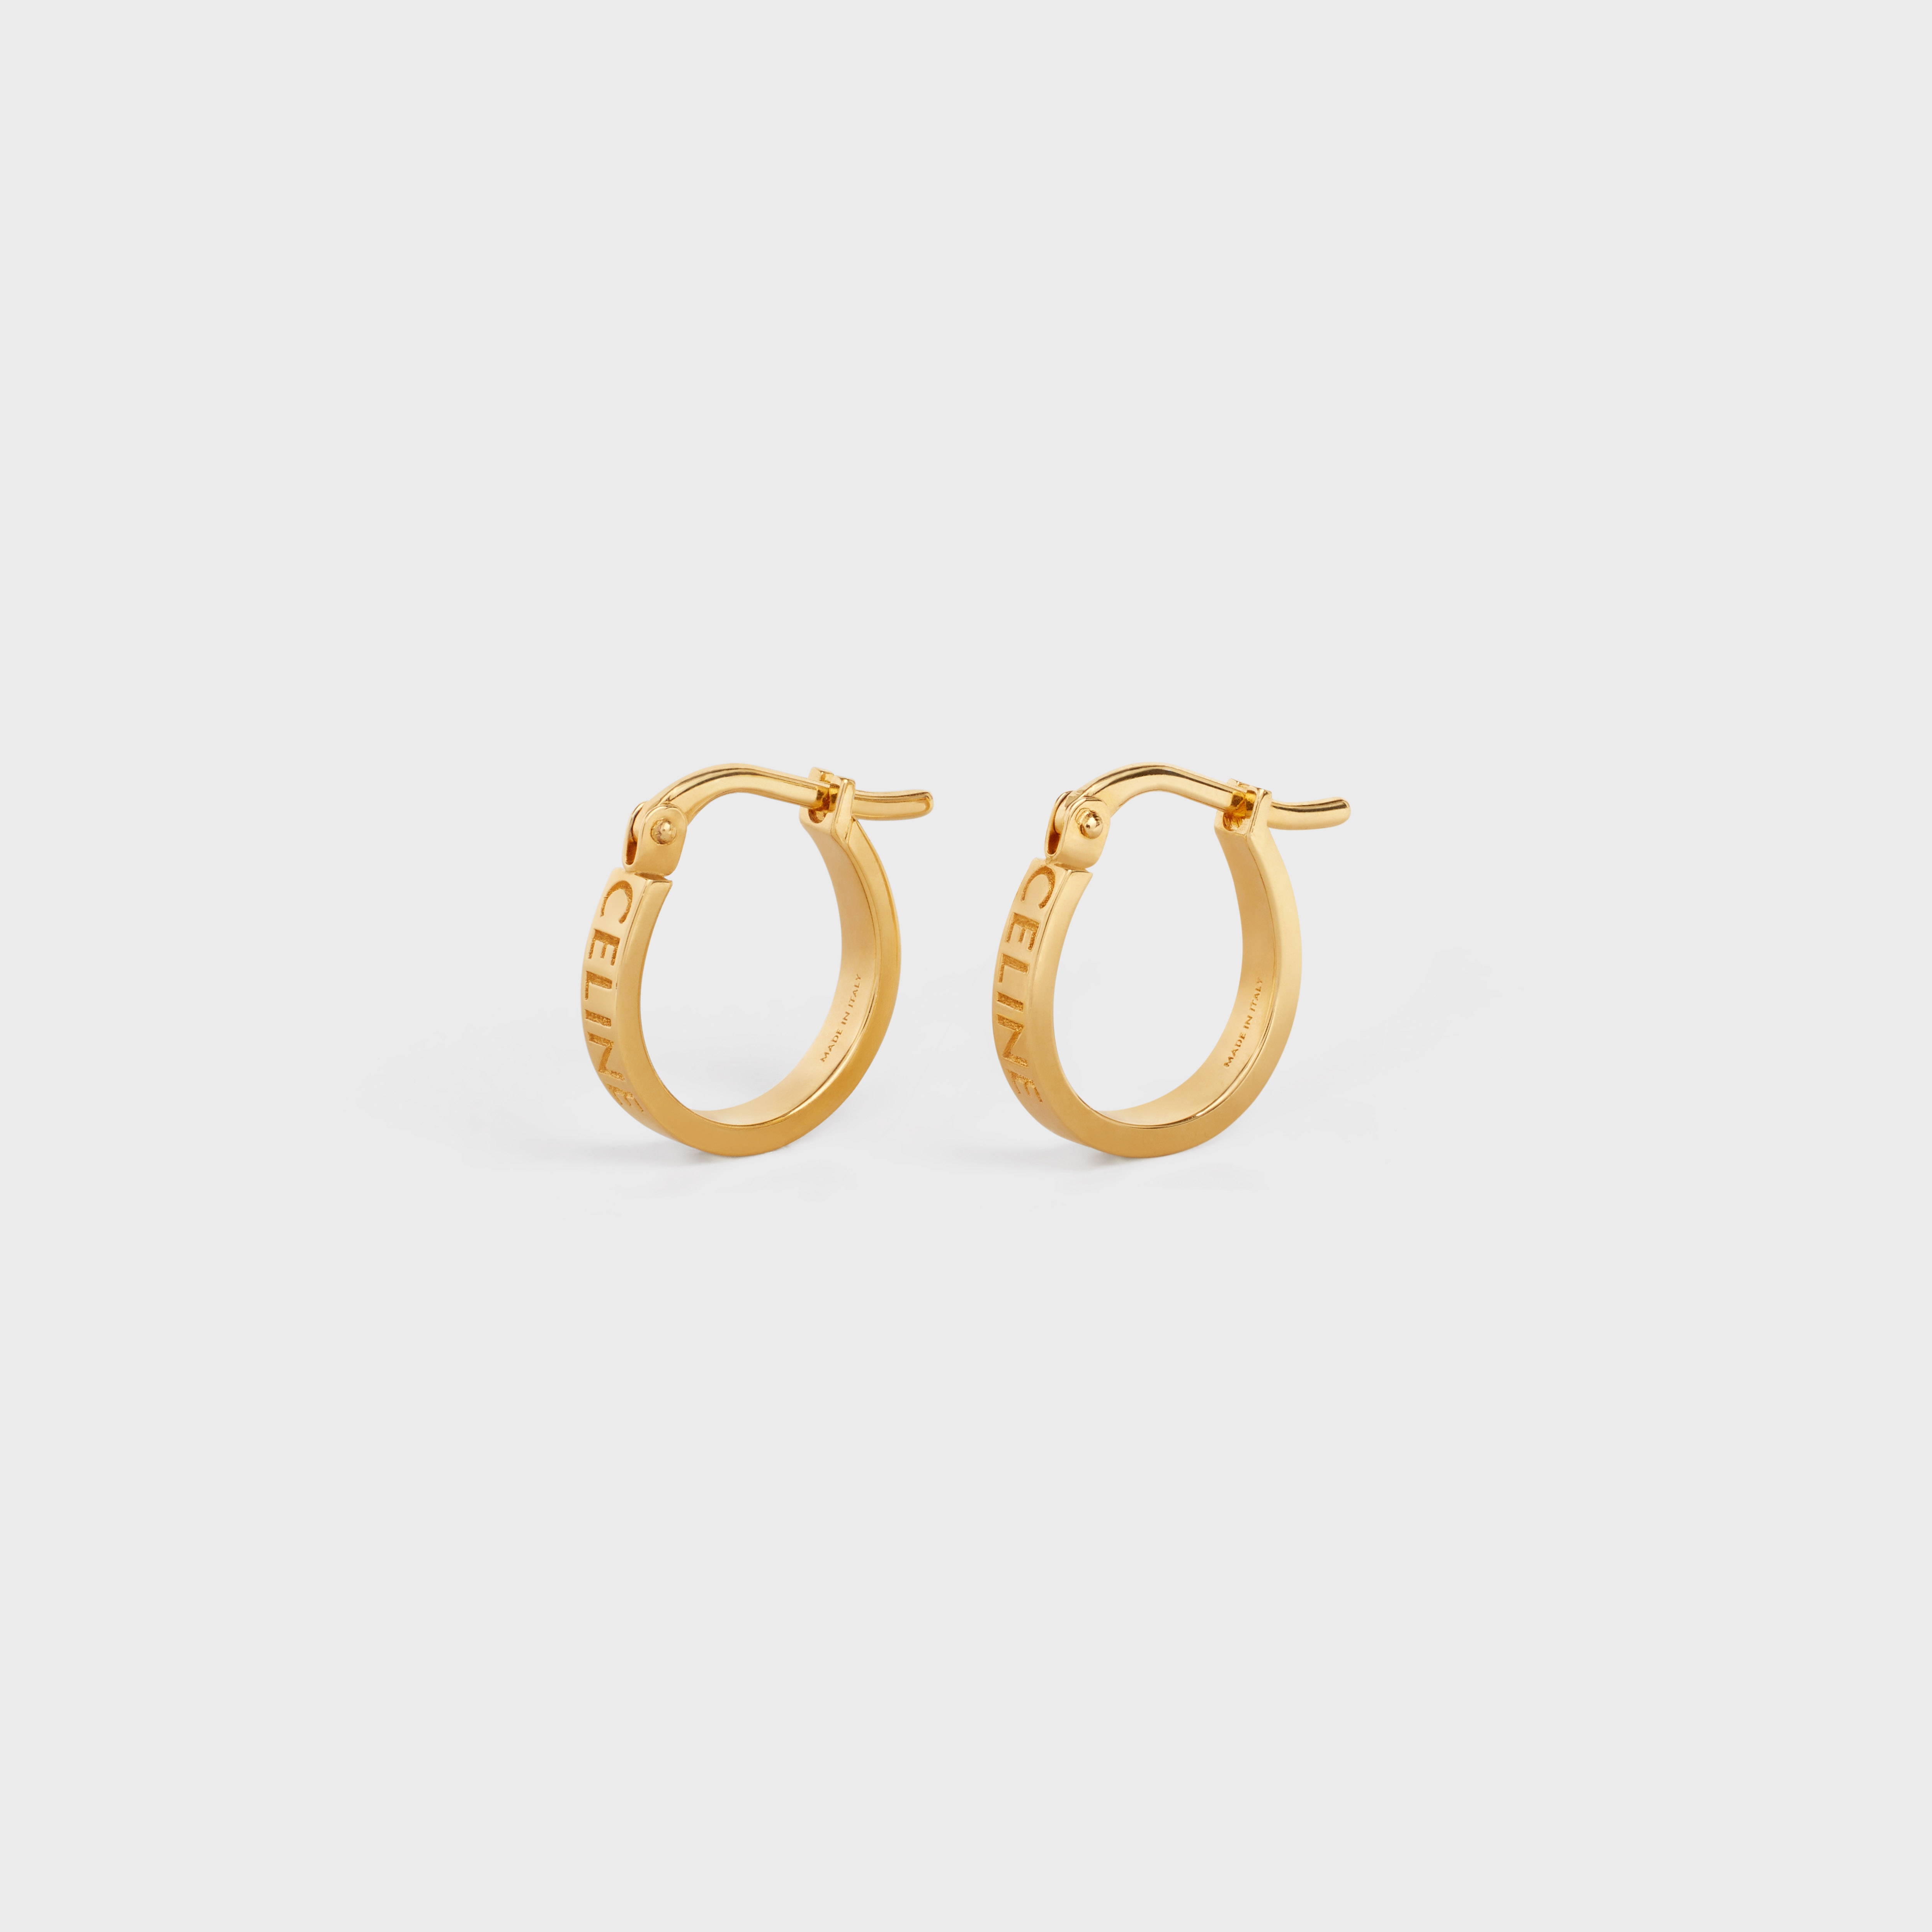 Celine Paris Hoops in Brass with Gold Finish - 2